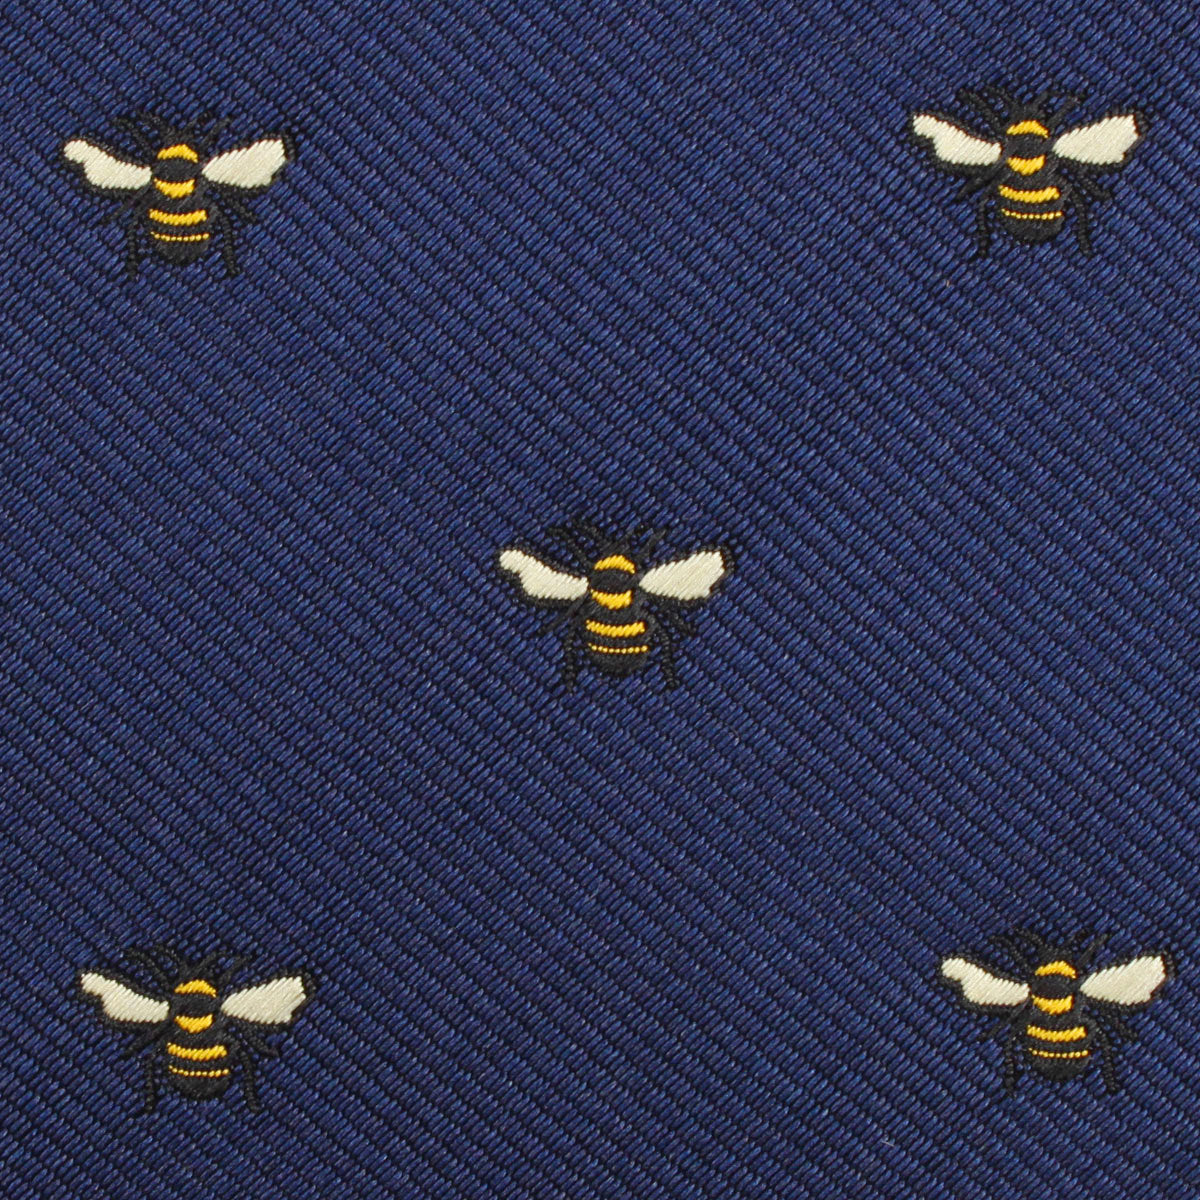 Bumble Bee Fabric Mens Bow Tie